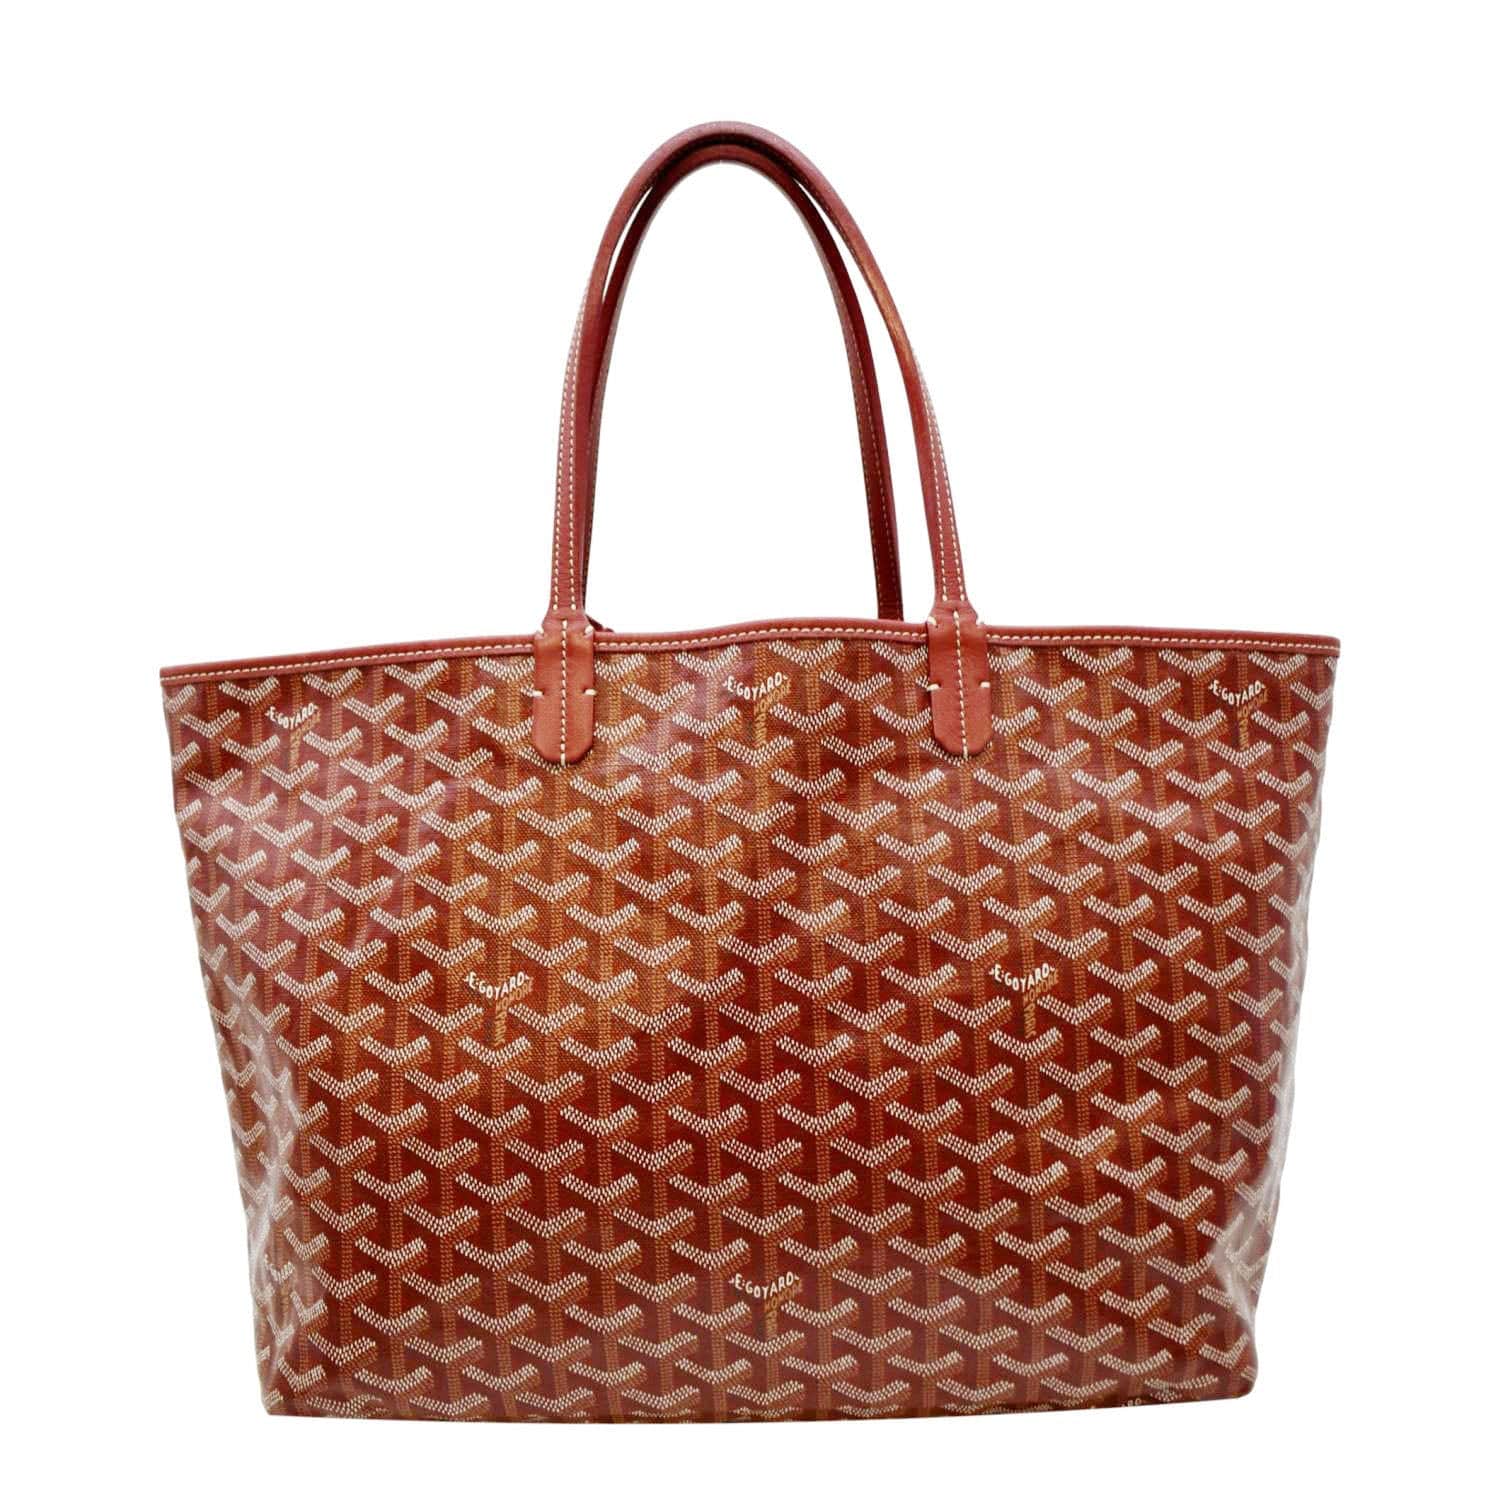 What is the most popular Goyard bag color? - Questions & Answers